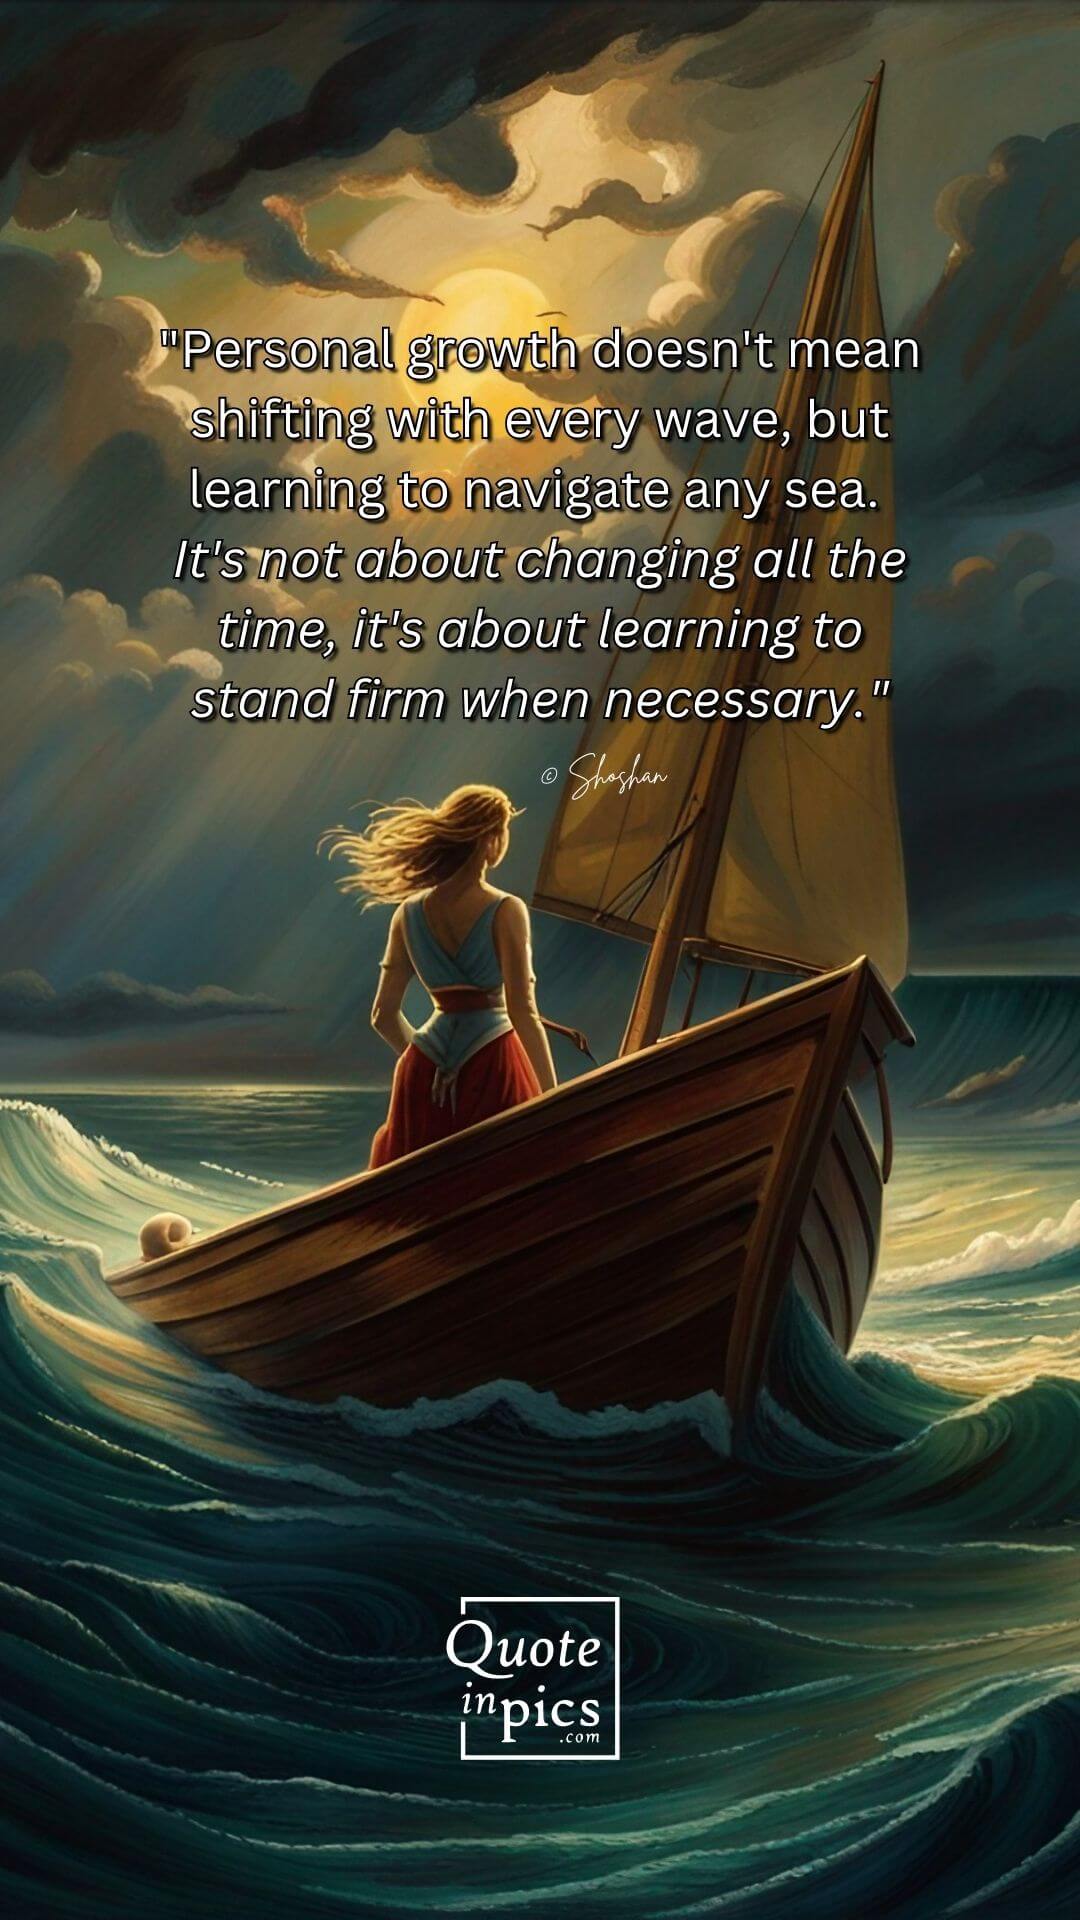 Personal growth doesn't mean shifting with every wave, but learning to navigate any sea.